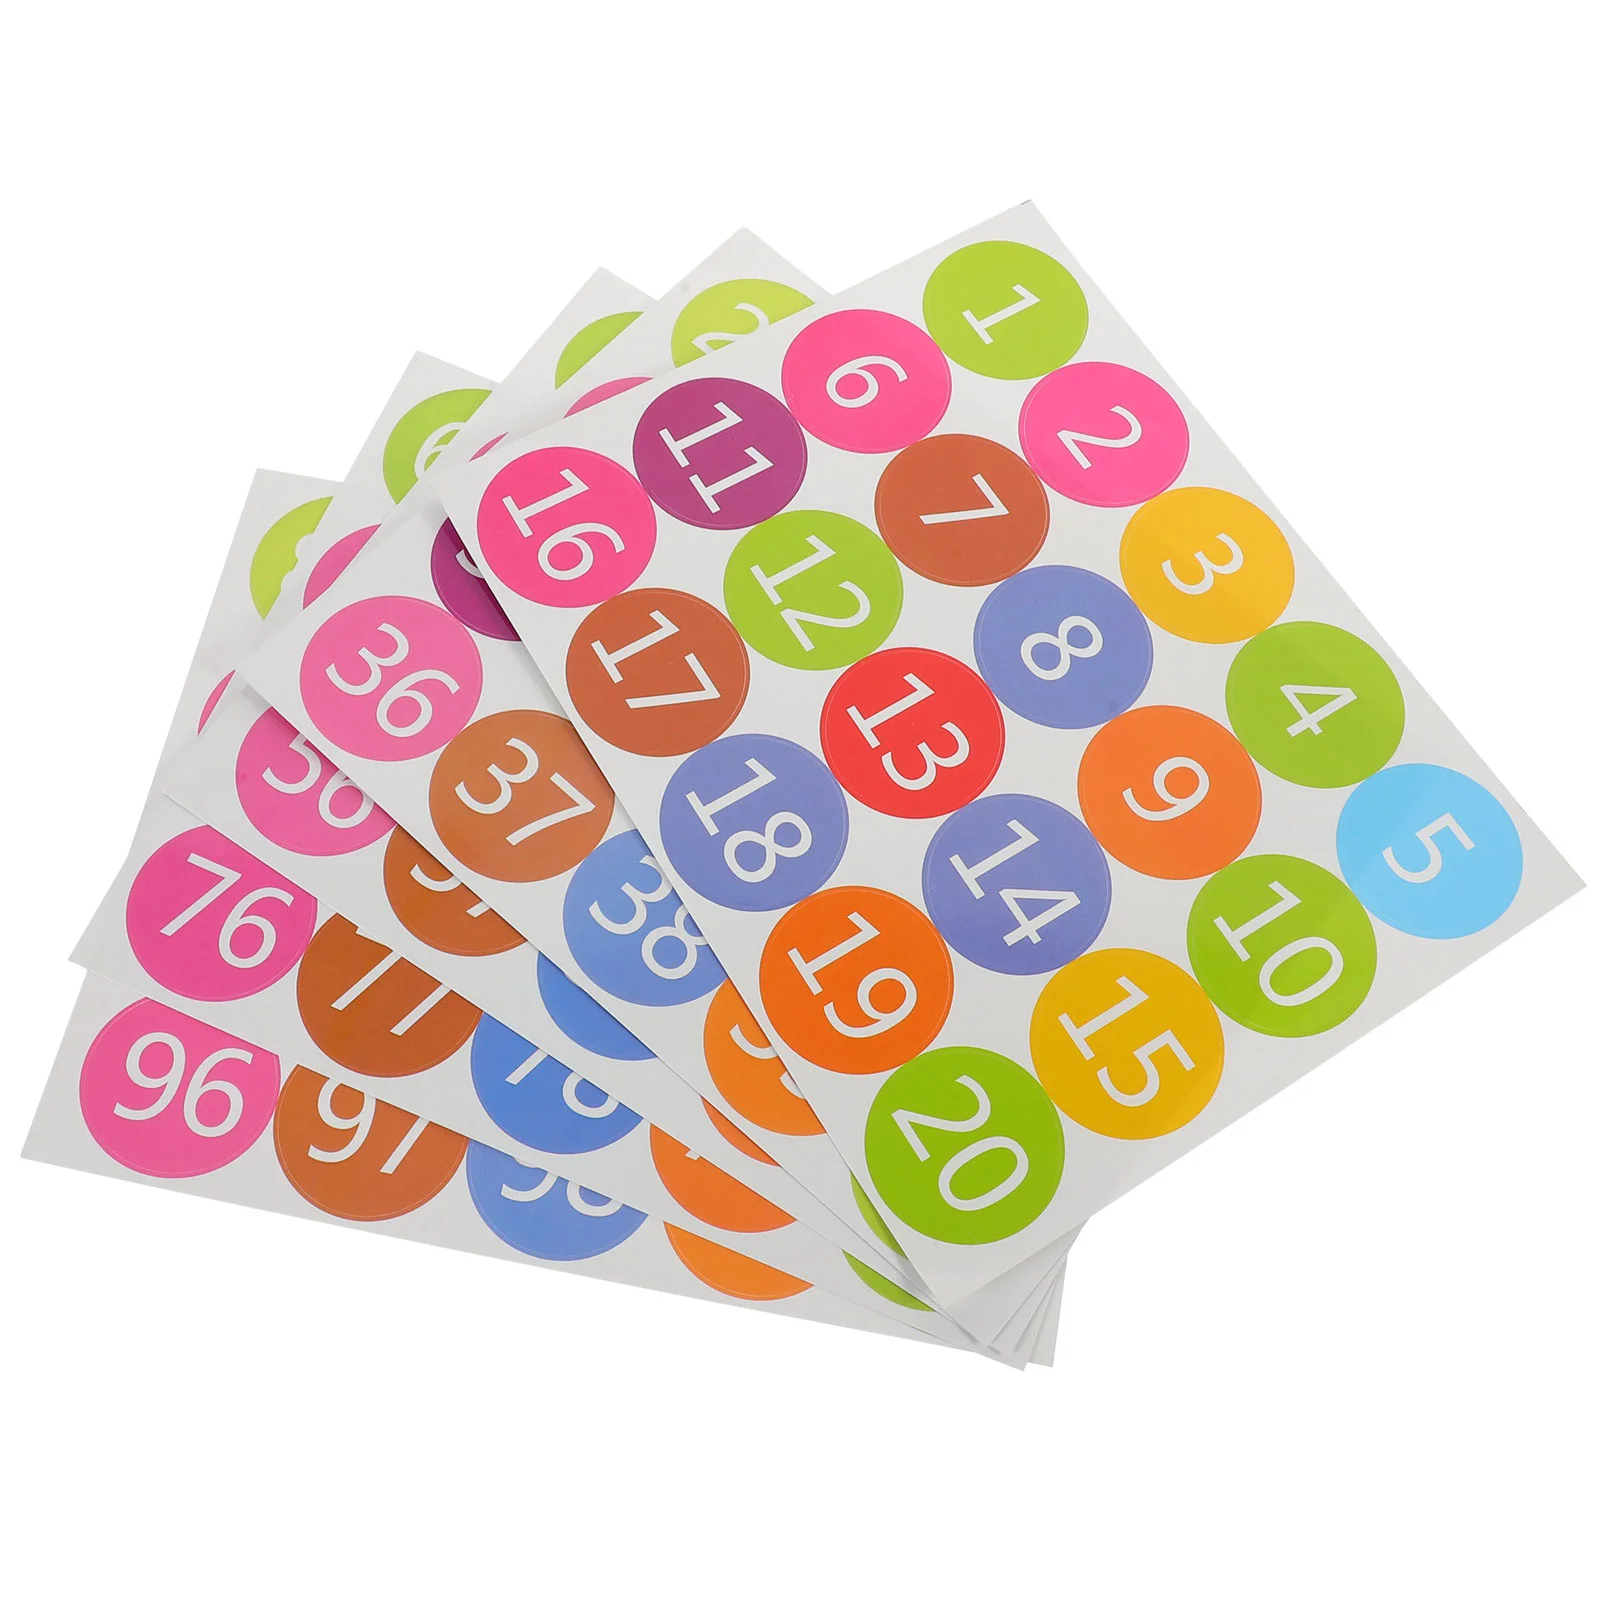 

100pcs Adhesive Number Stickers Colored Number Labels Classification Stickers for Nursery Room Office